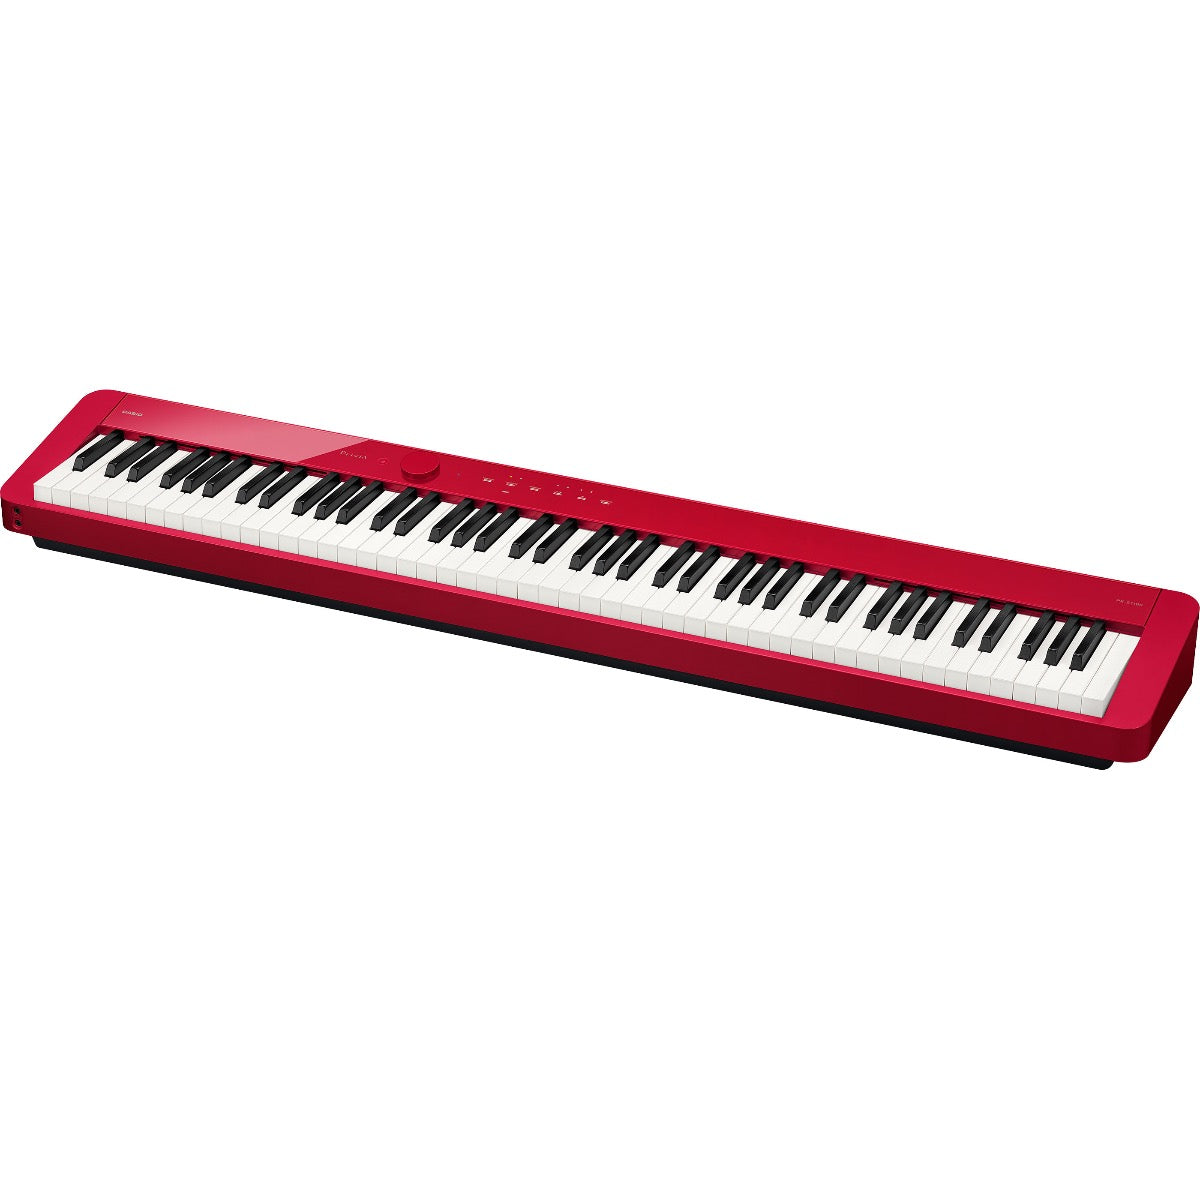 3/4 view of Casio Privia PX-S1100 Digital Piano - Red showing top, front and right side